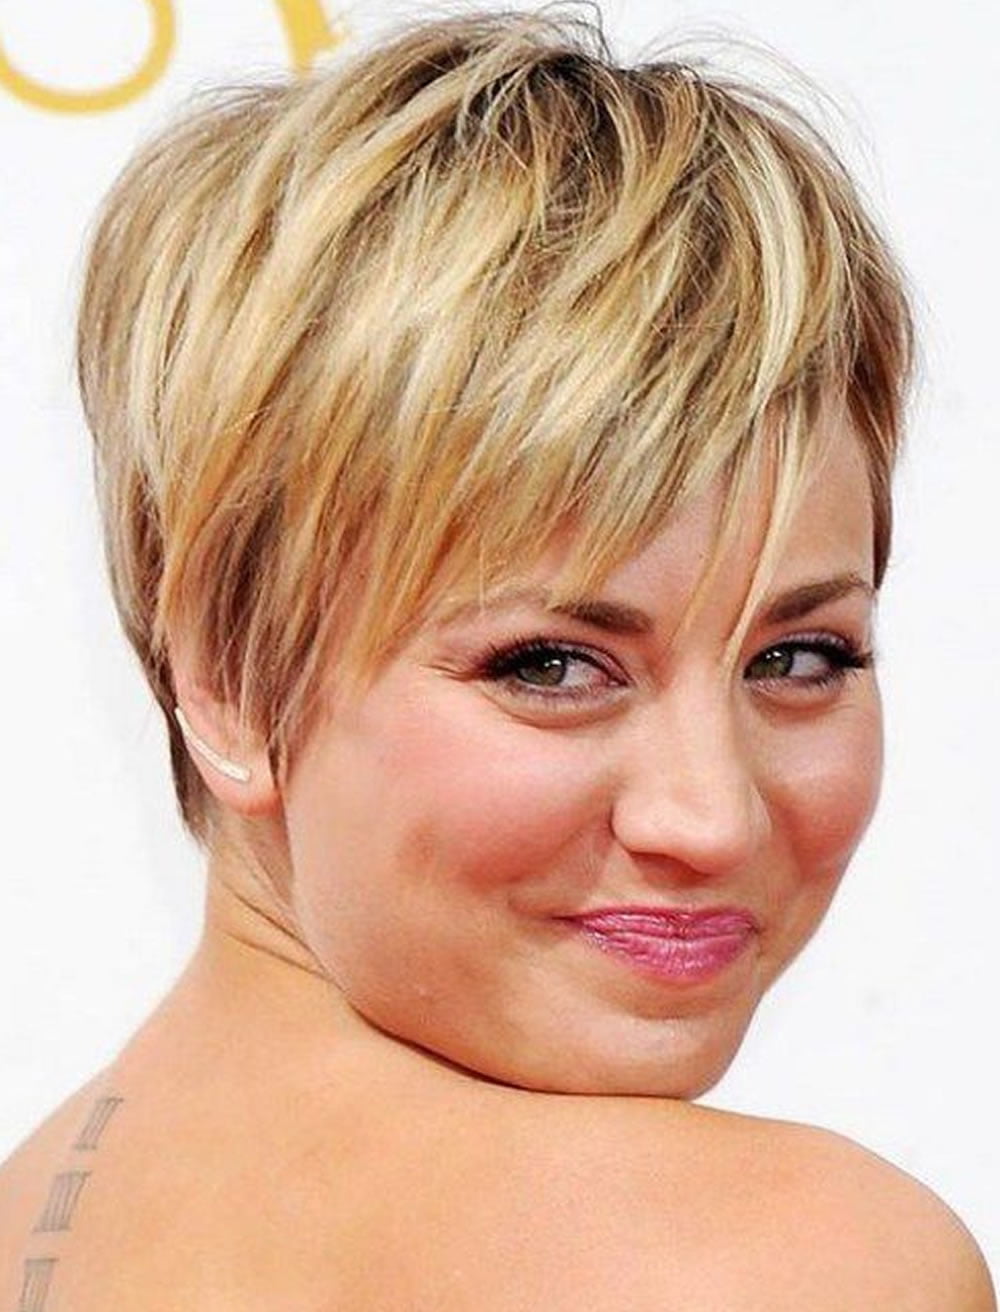 Short Haircuts For Round Face Thin Hair Ideas For 2018 Page 2 Of 4